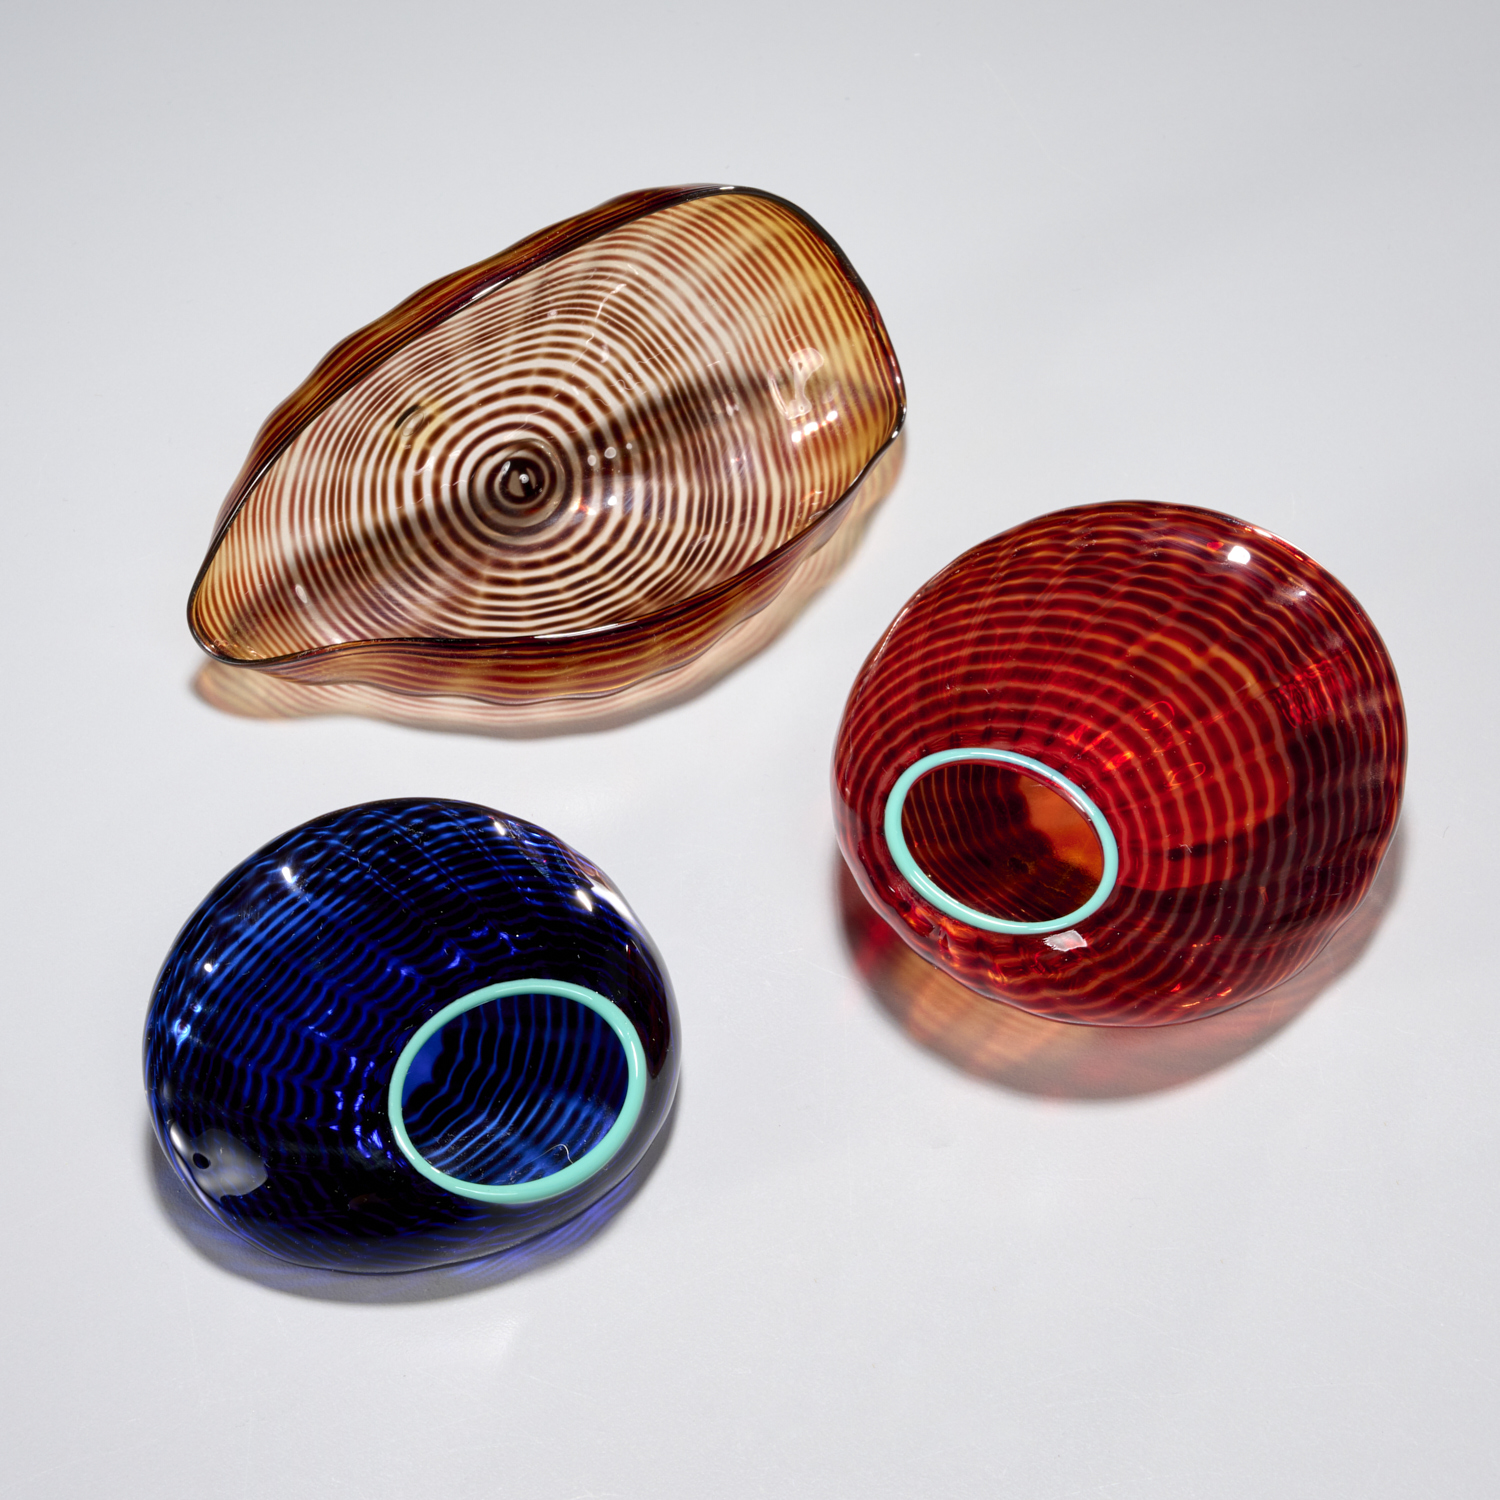 DALE CHIHULY 3 SMALL GLASS VESSEL 3b4639